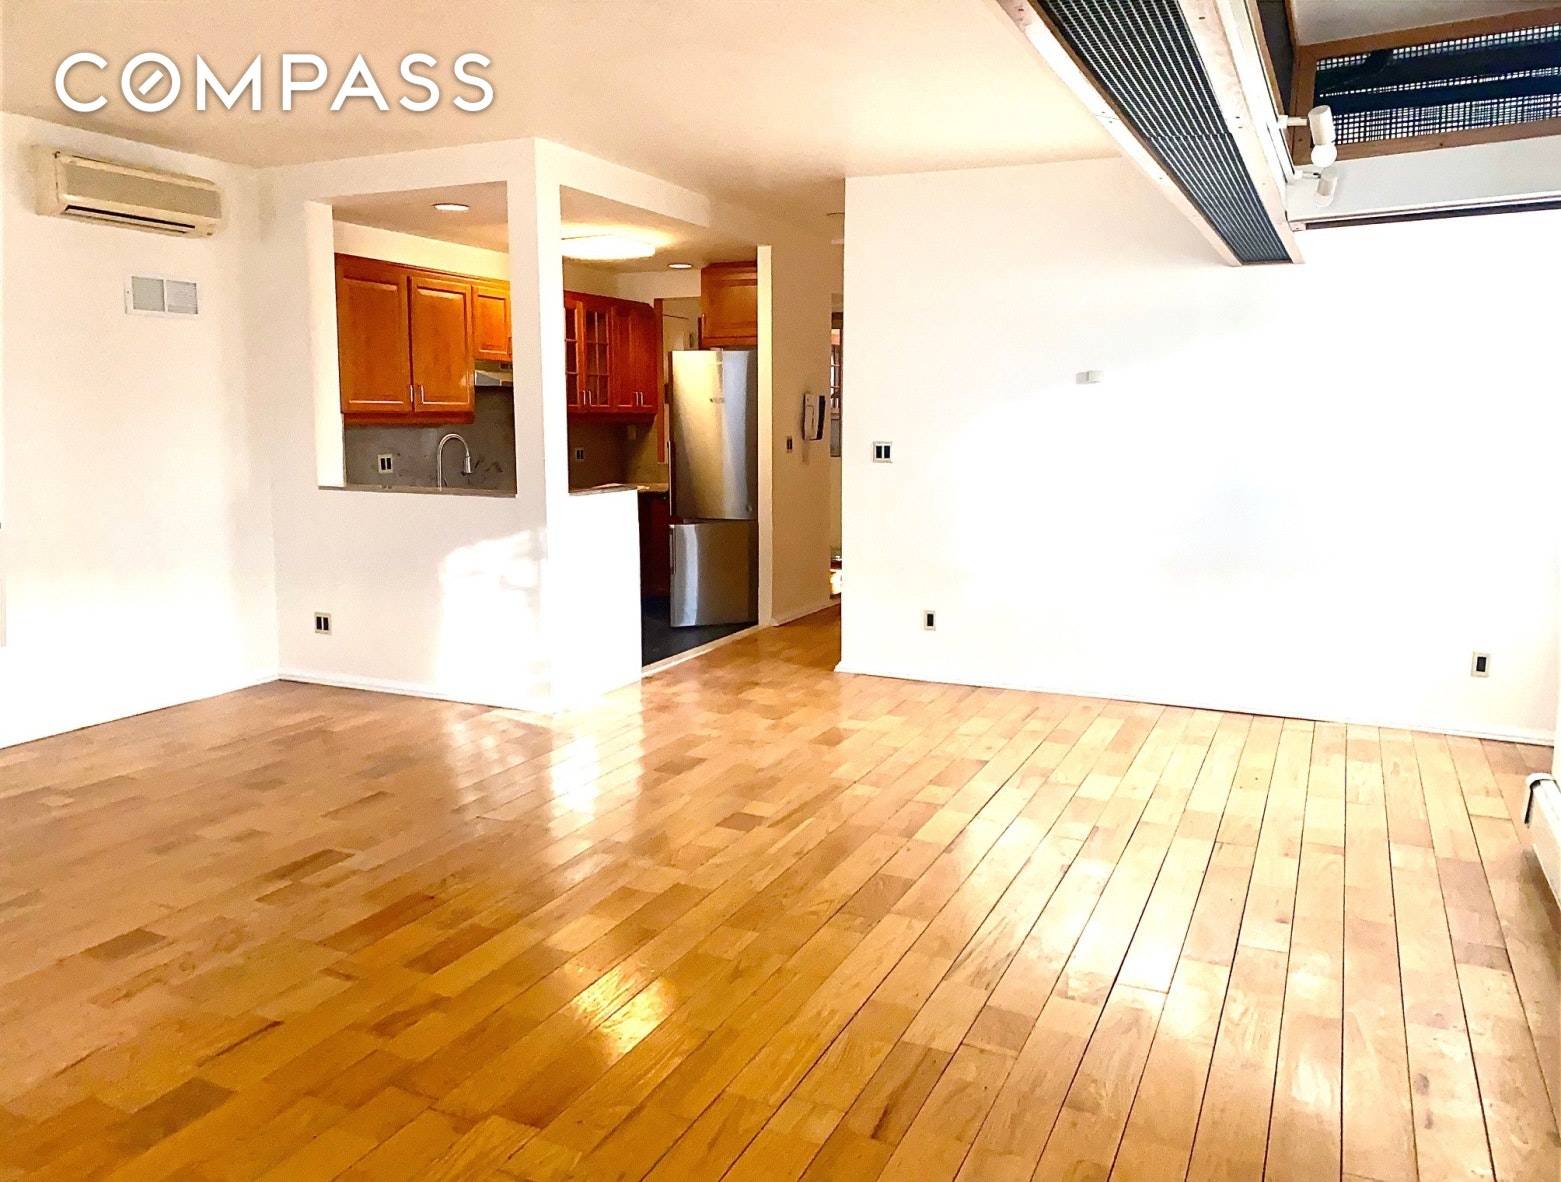 Good for shares ! Amazing 2BR apartment is located on the first floor high floor in a small apartment building.